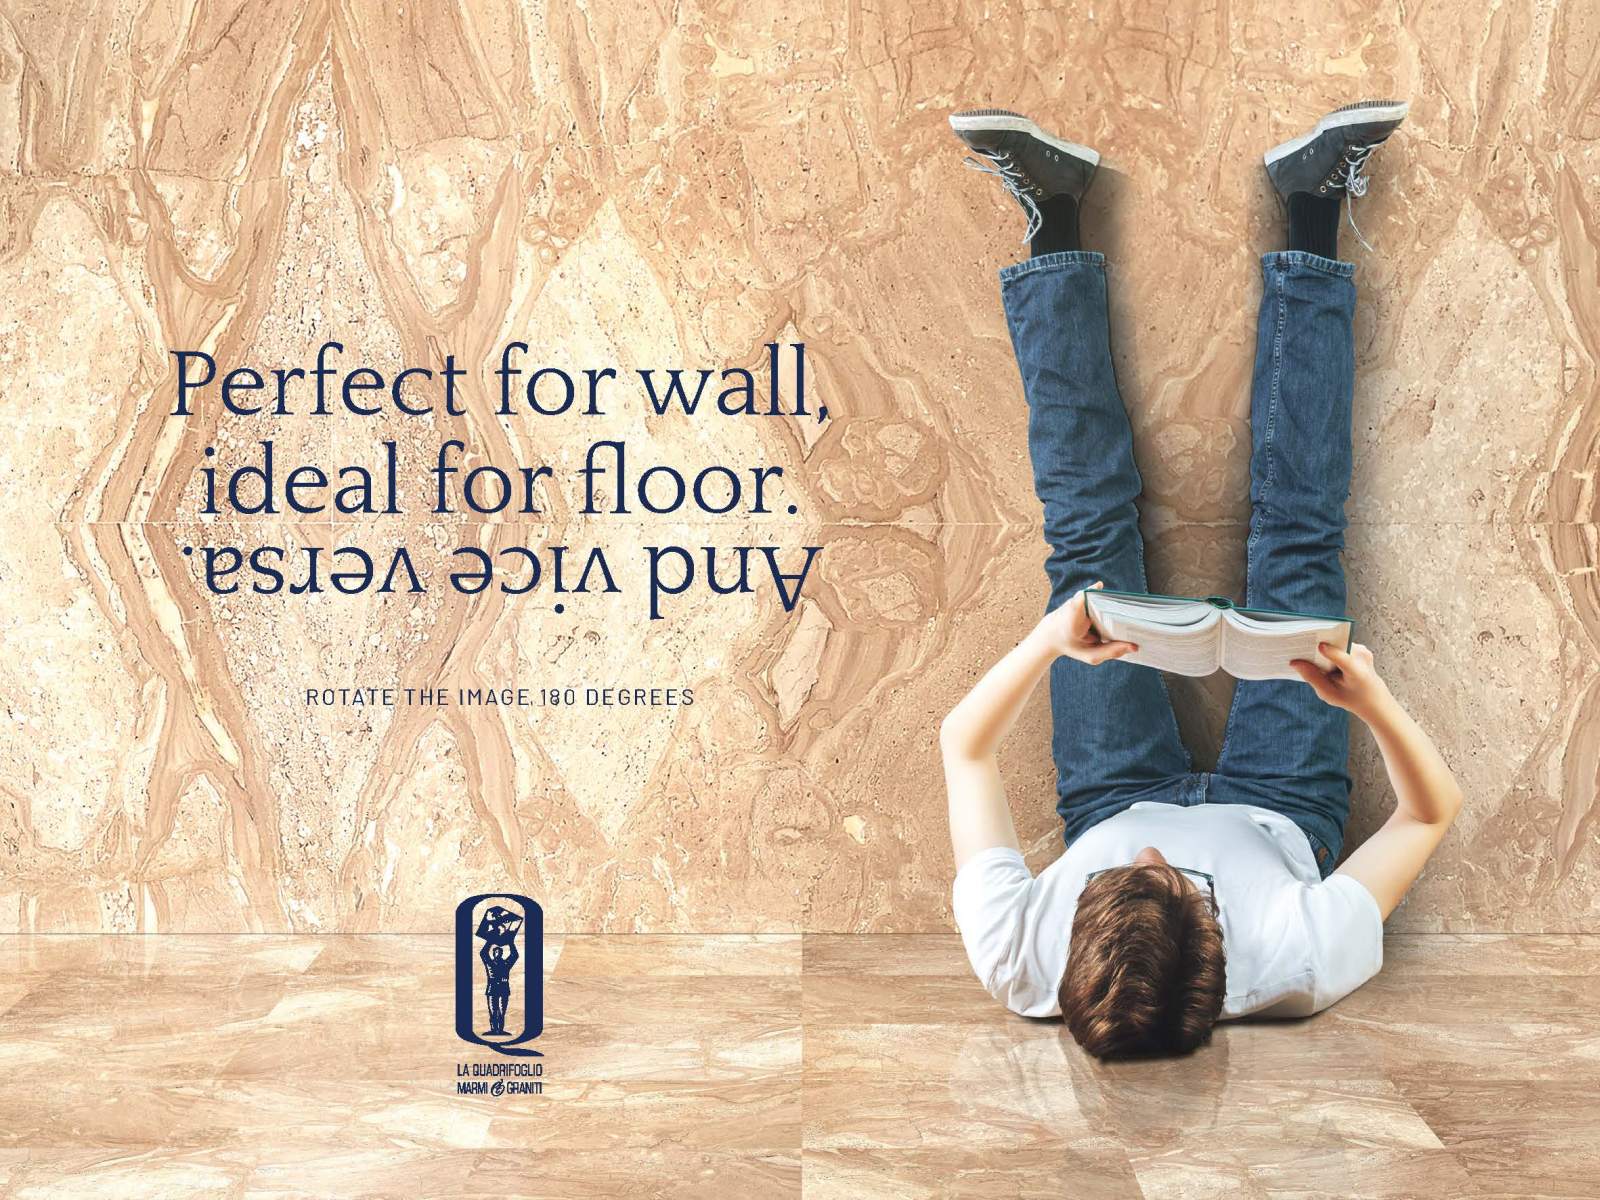 Perfect for wall, ideal for floor.<br> And vice versa.